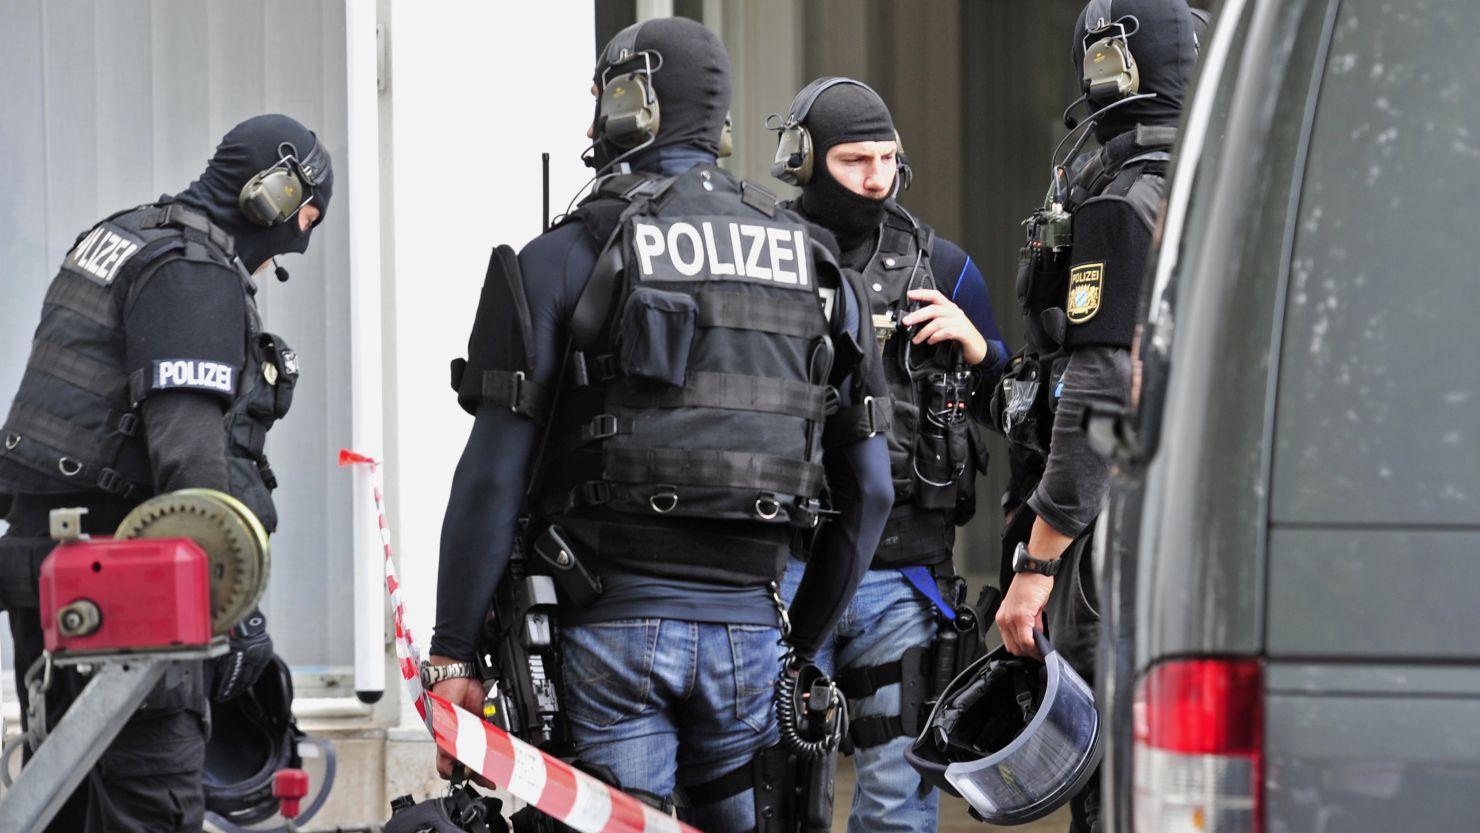  German special police forces arrive at a hostage situation in the townhall in Ingolstadt, Germany, on Monday.